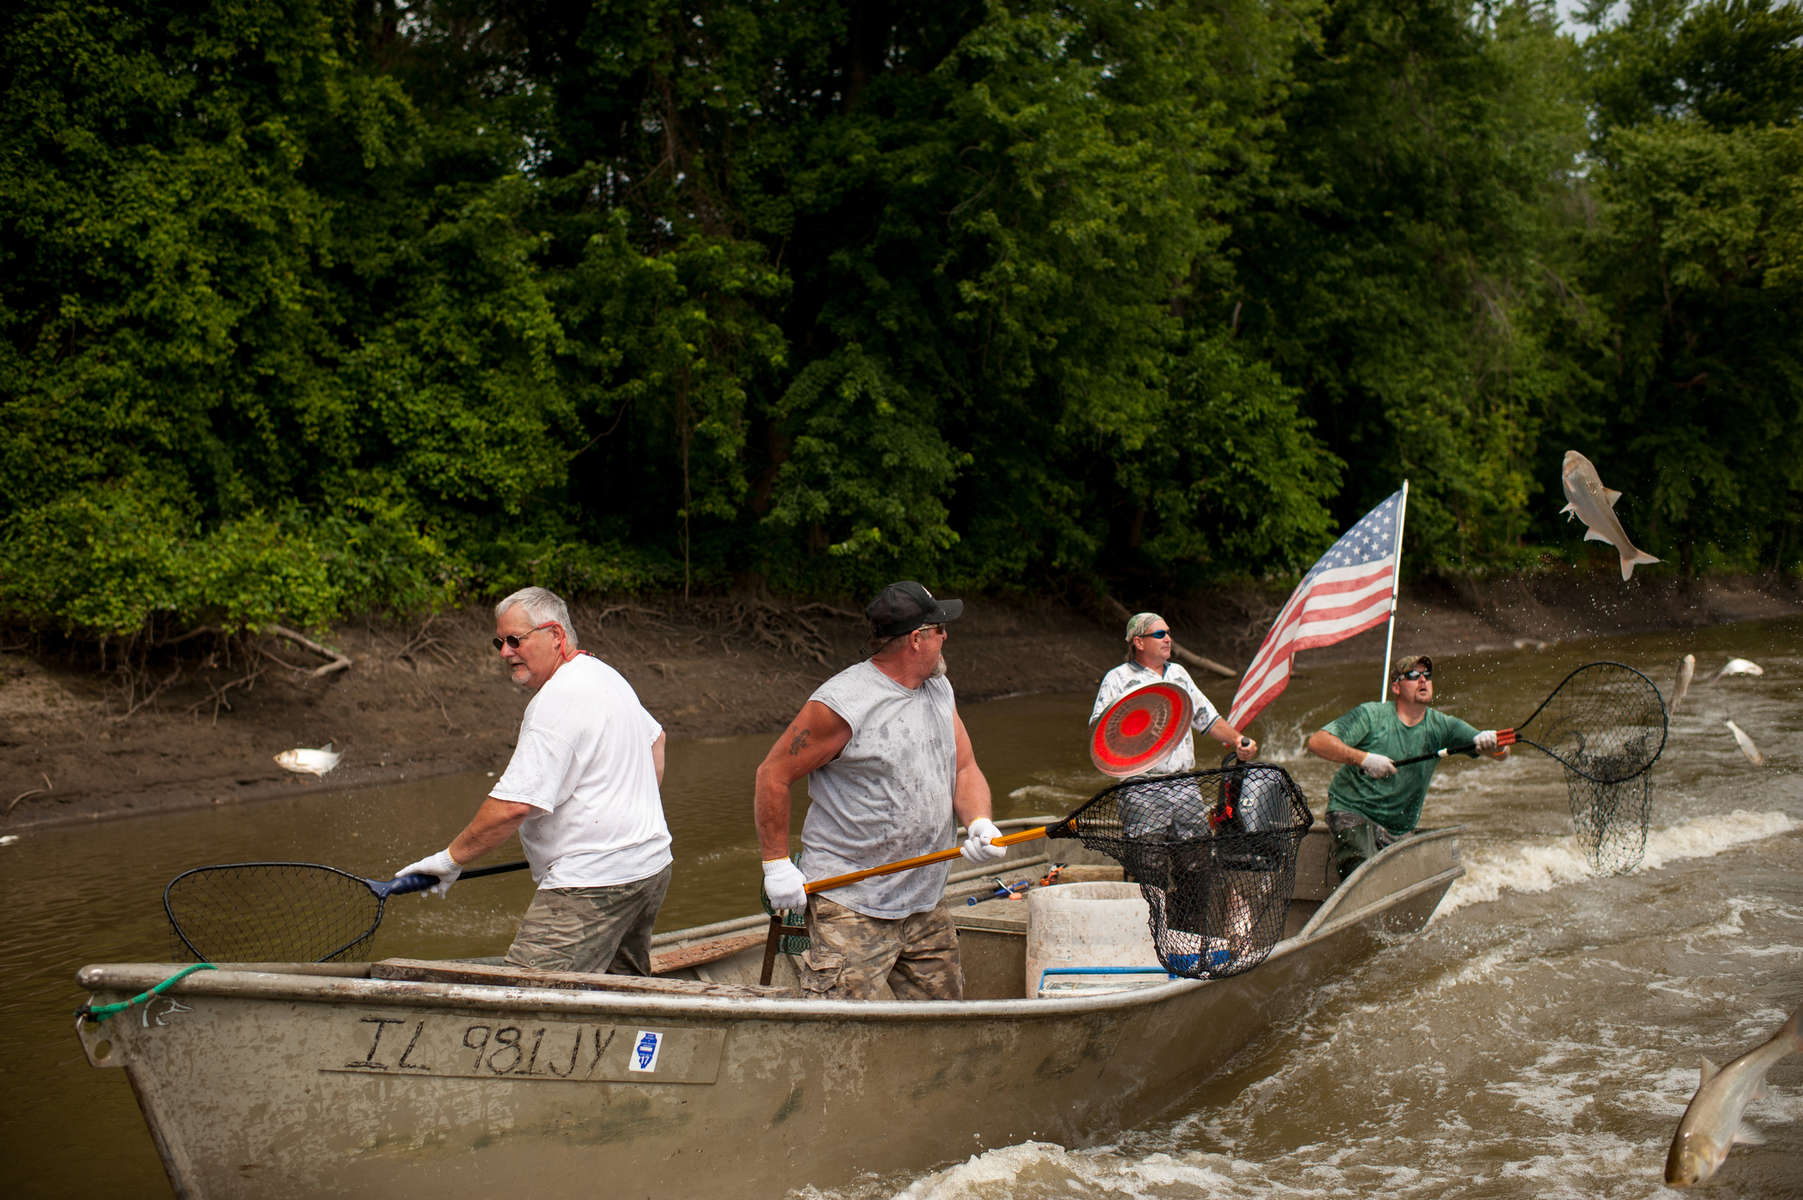 Red Neck Fishing Tournament Friday, August 1, 2014, in Bath , ILL. Photo by Rob Hart